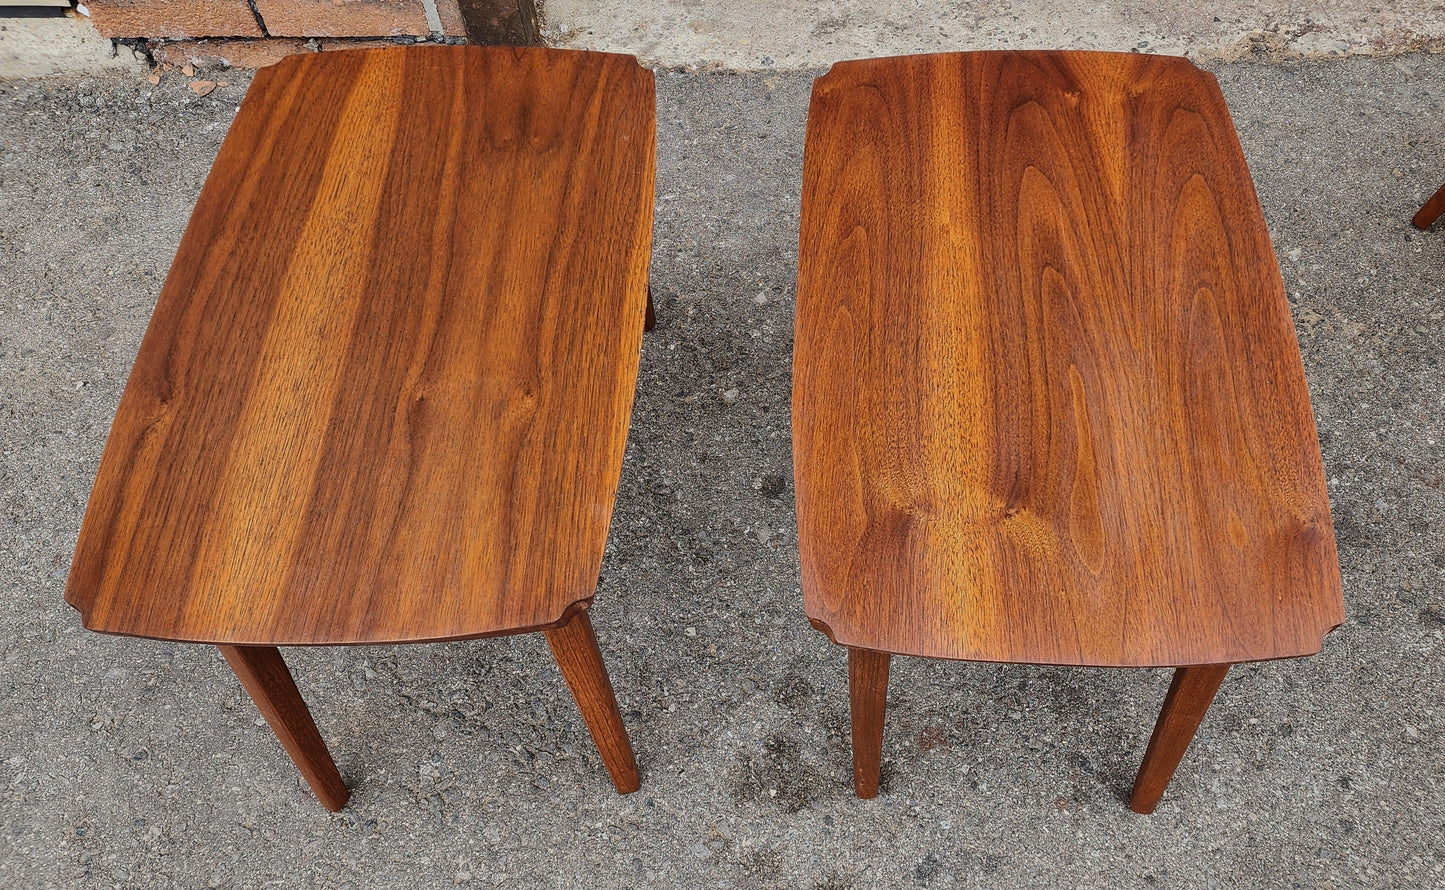 REFINISHED Mid Century Modern Solid Walnut Coffee Table & 2 End Tables